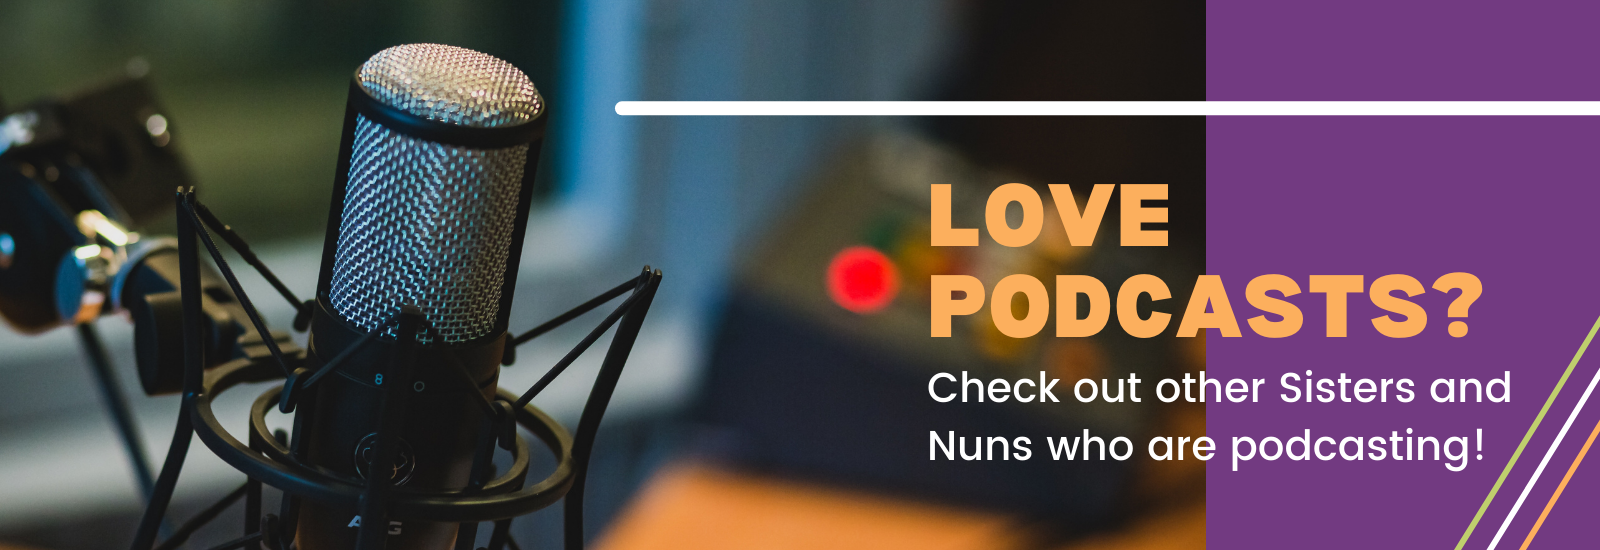 Podcasts by Catholic Sisters and Nuns